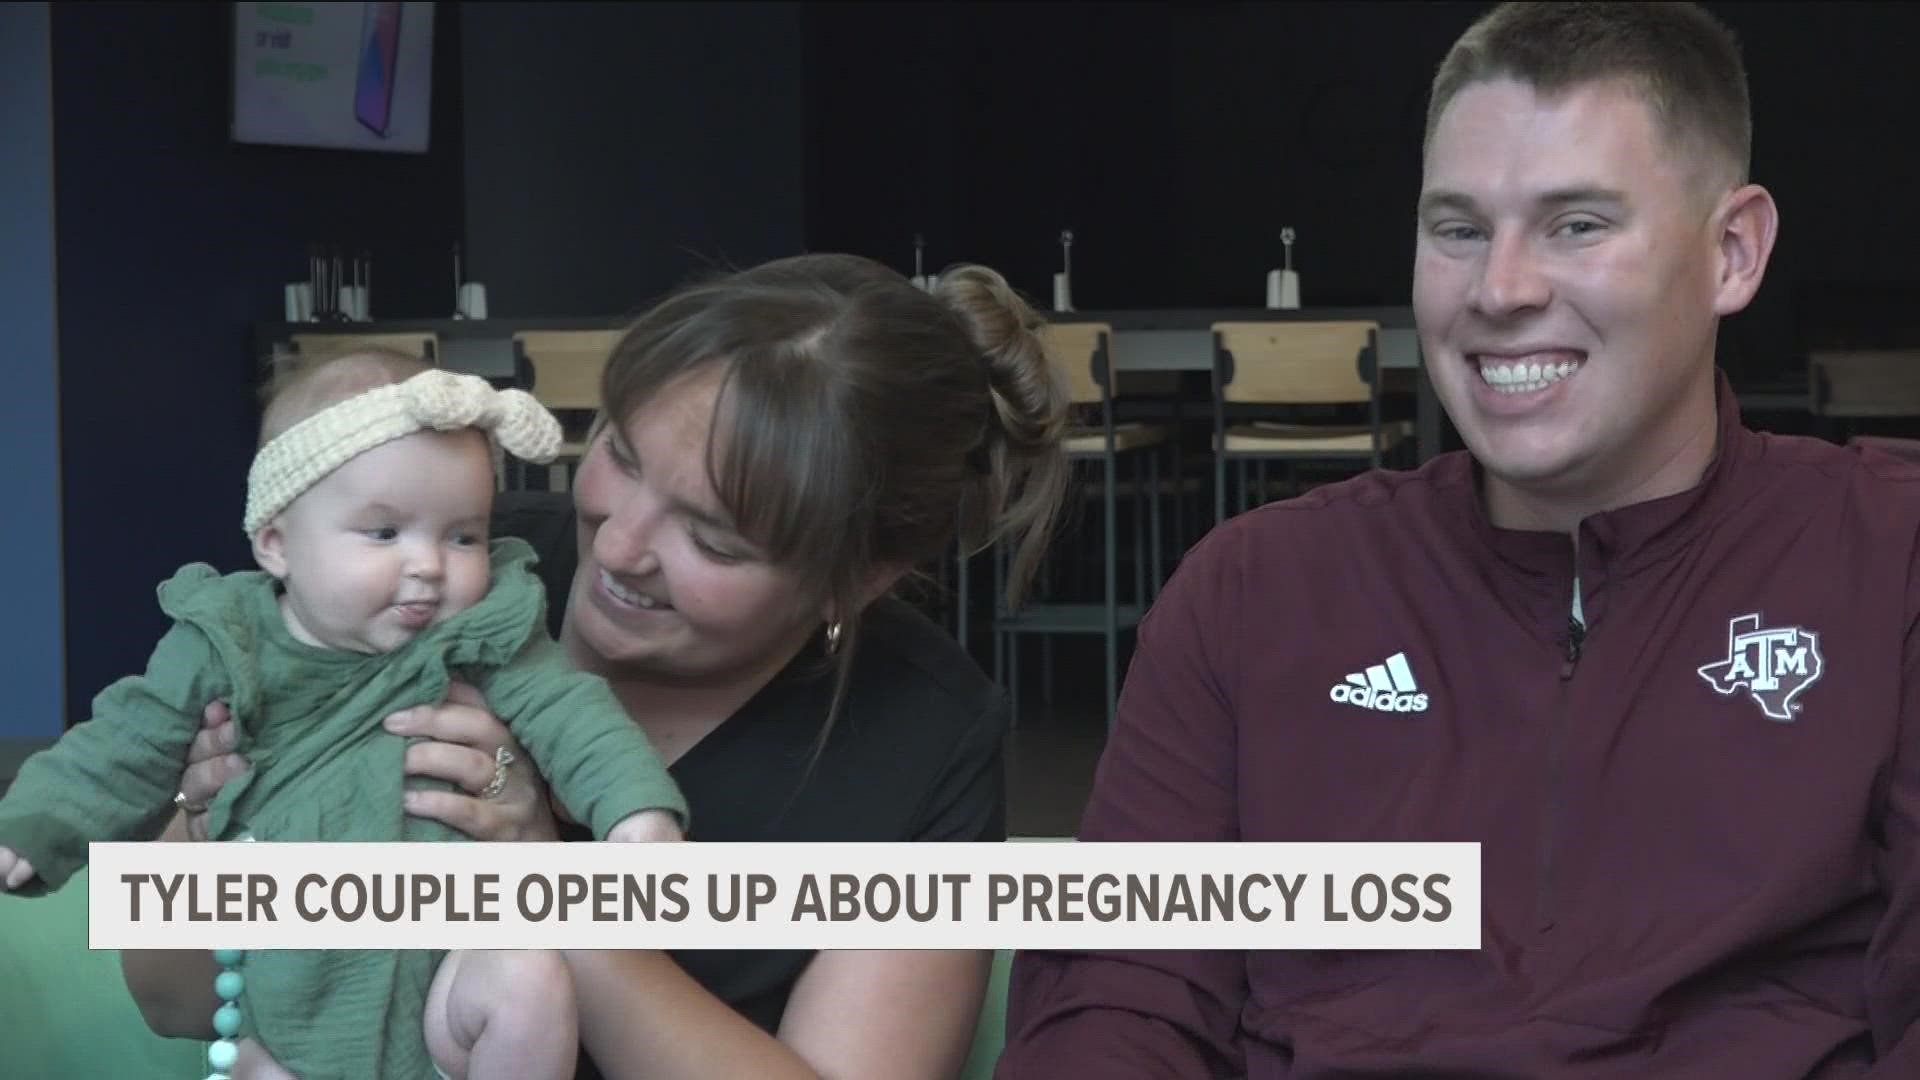 Tyler couple open up about pregnancy loss to spread awareness